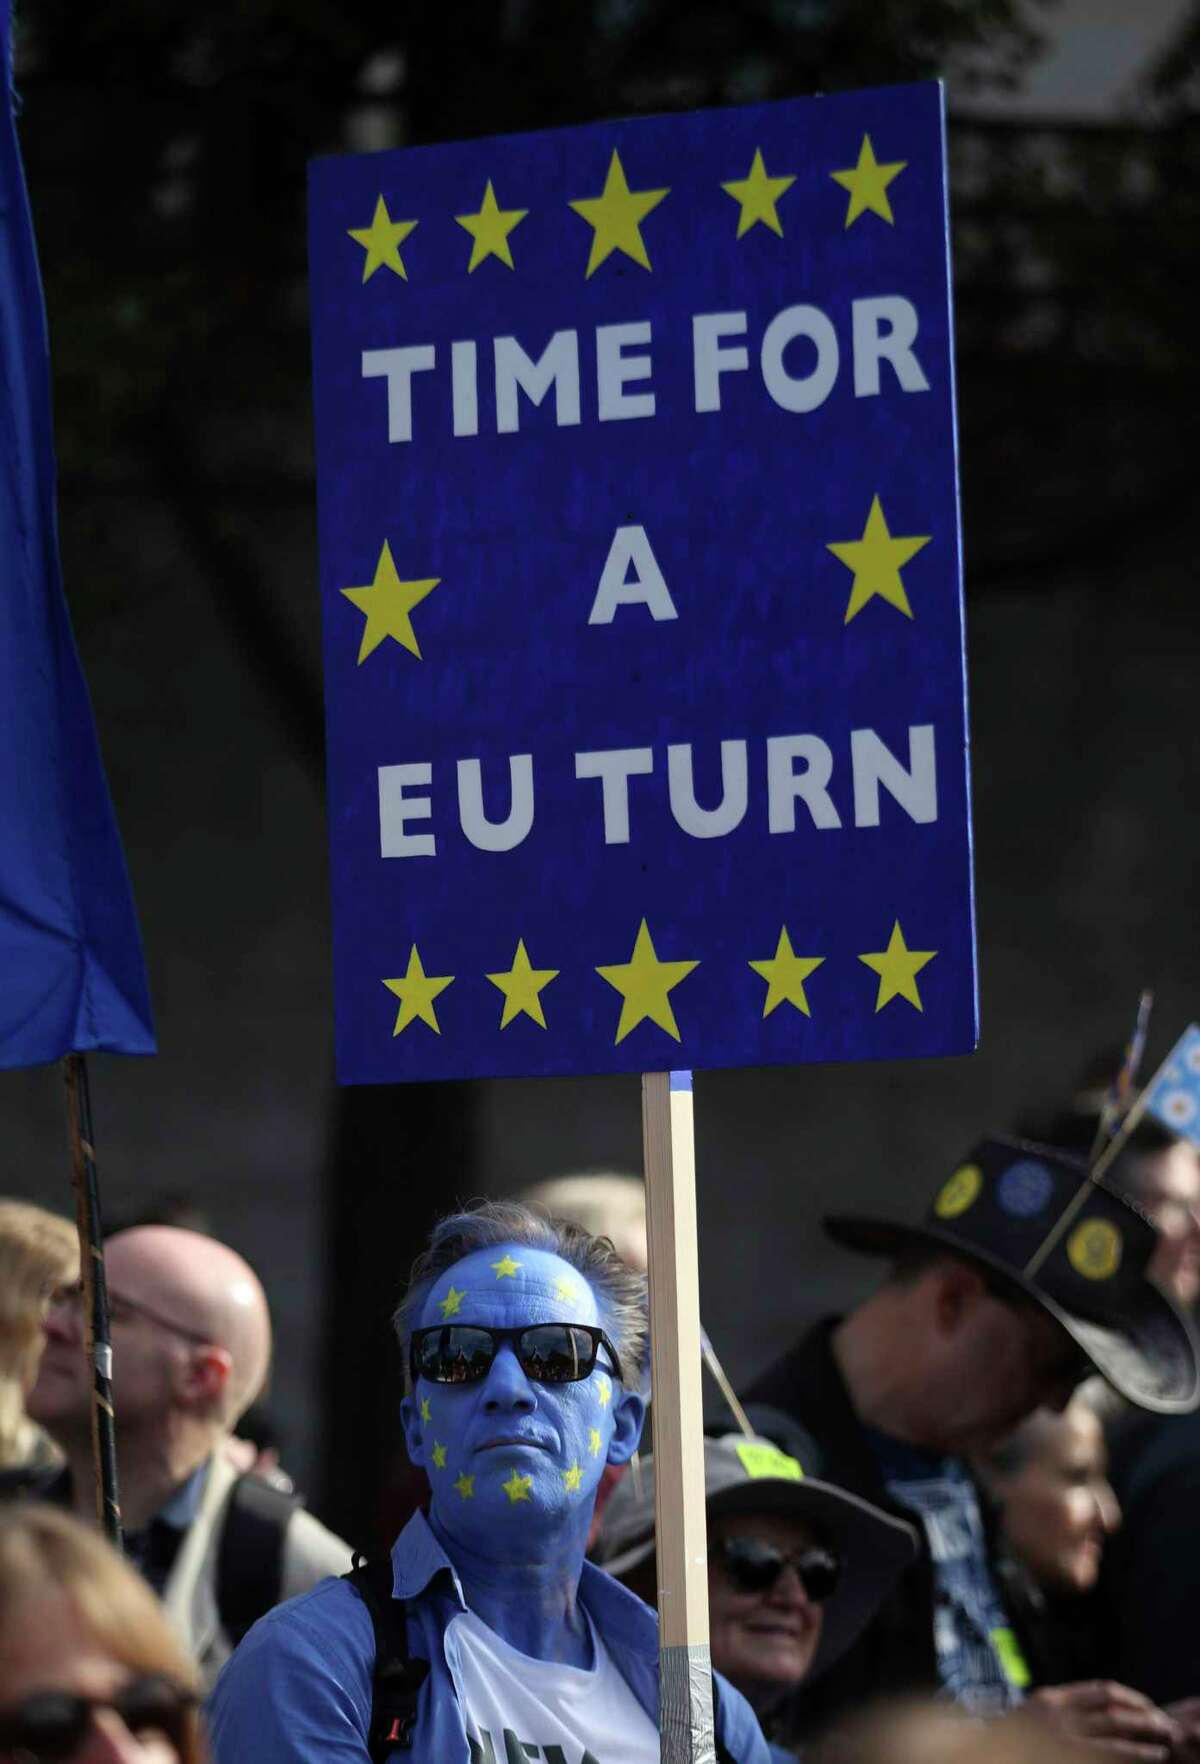 An anti-Brexit campaigner with his face painted in the colours of the European Union flag, during the People's Vote March, in London, Saturday Oct. 20, 2018. Some thousands of protesters are marching through central London, Saturday, to demand a new referendum on Britain?’s Brexit departure from the European Union. (Yui Mok/PA via AP)